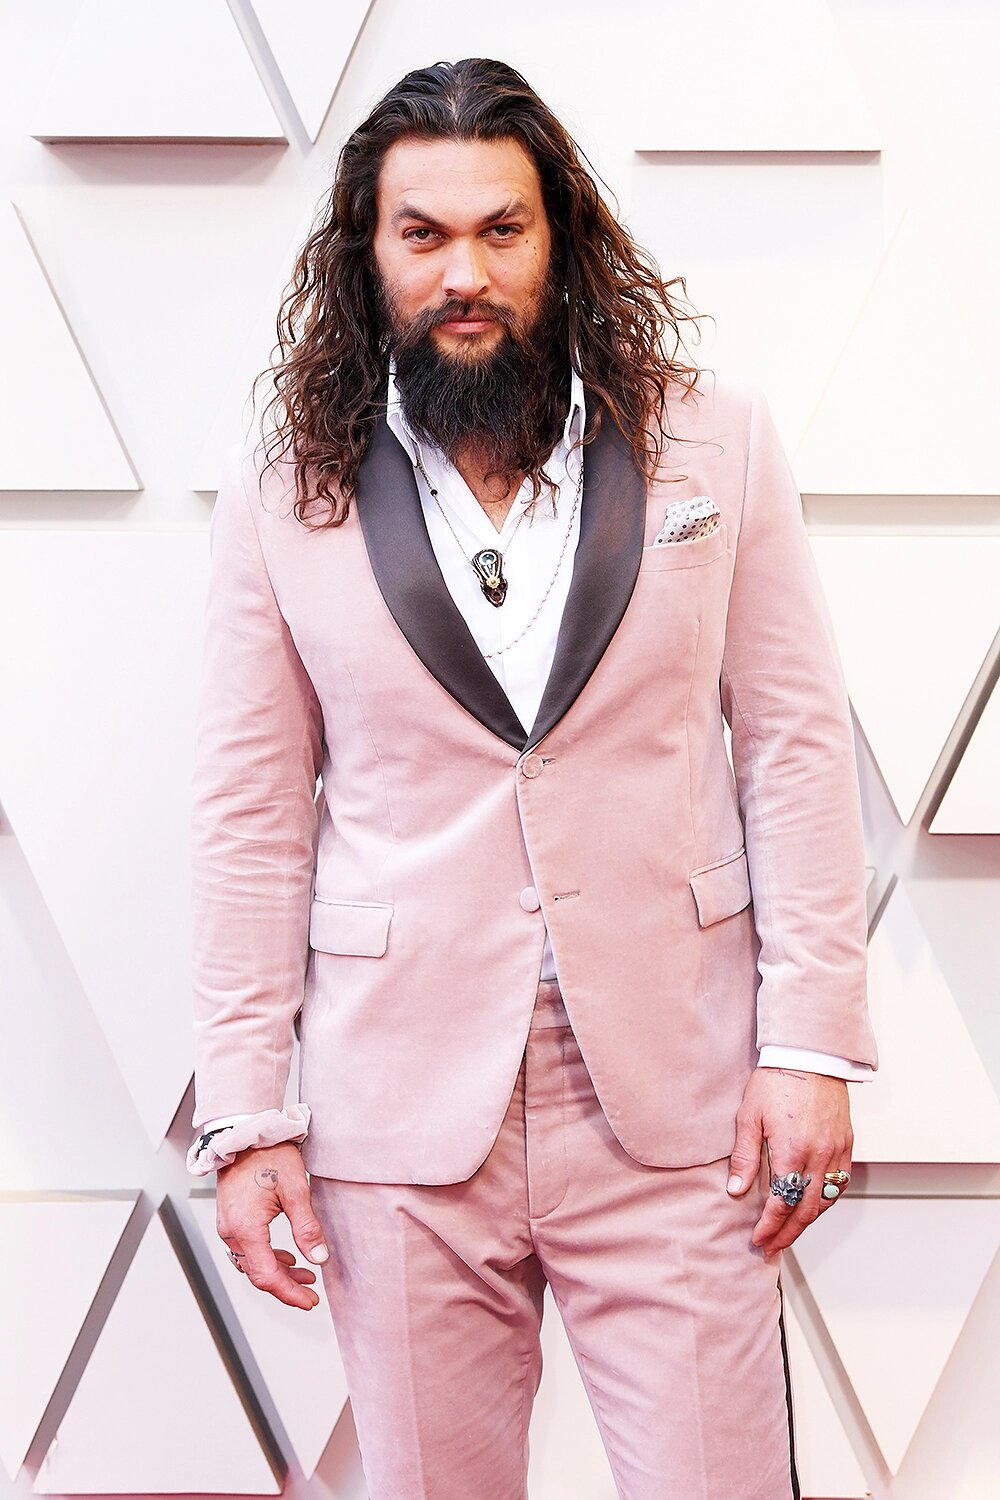 Aquaman Star Jason Momoa Involved In Head-on Collision With Motorcycle